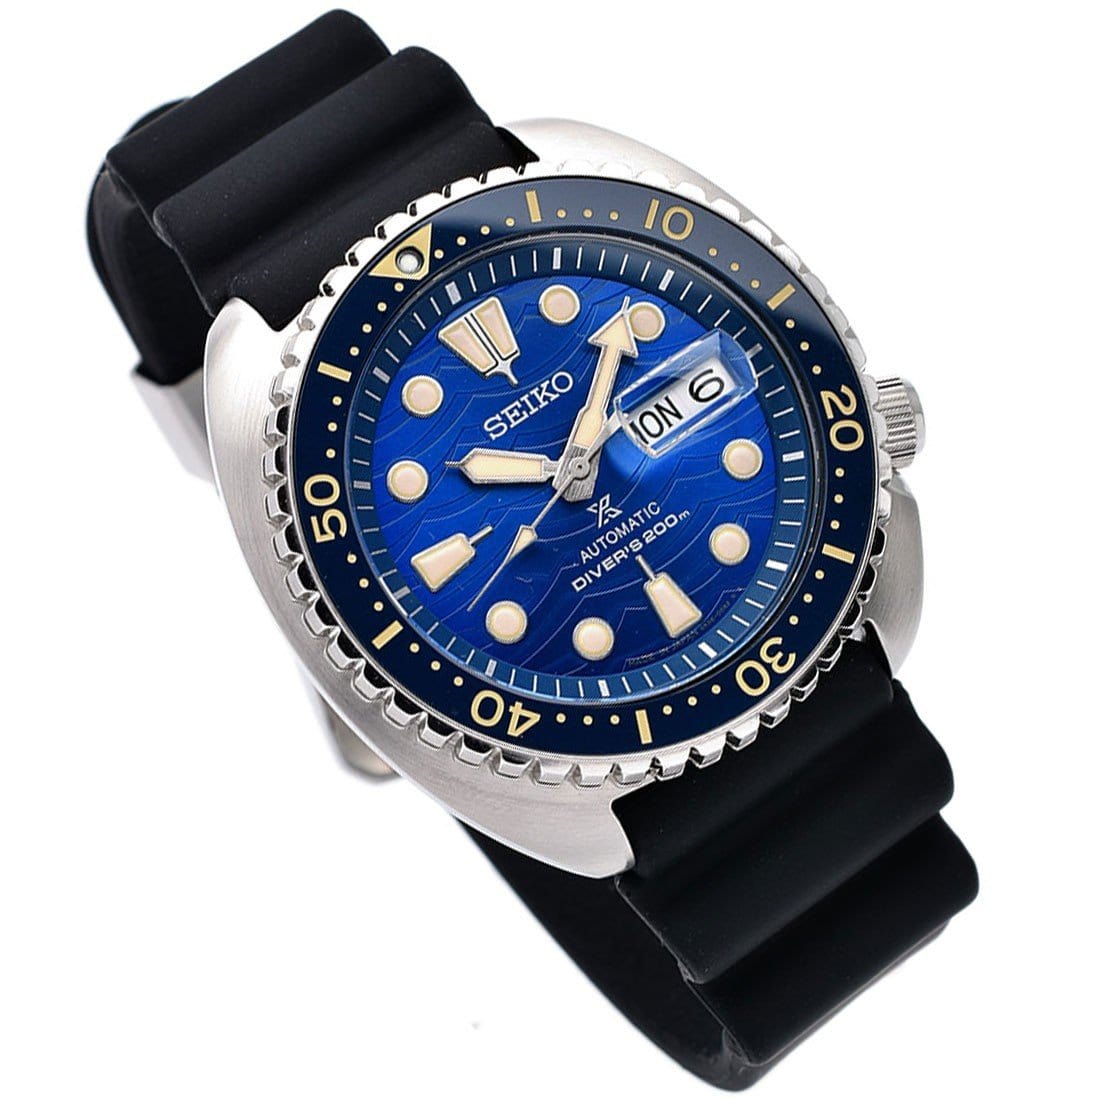 SBDY047 Seiko Prospex Turtle Save The Ocean Automatic Blue Dial Male Divers Watch